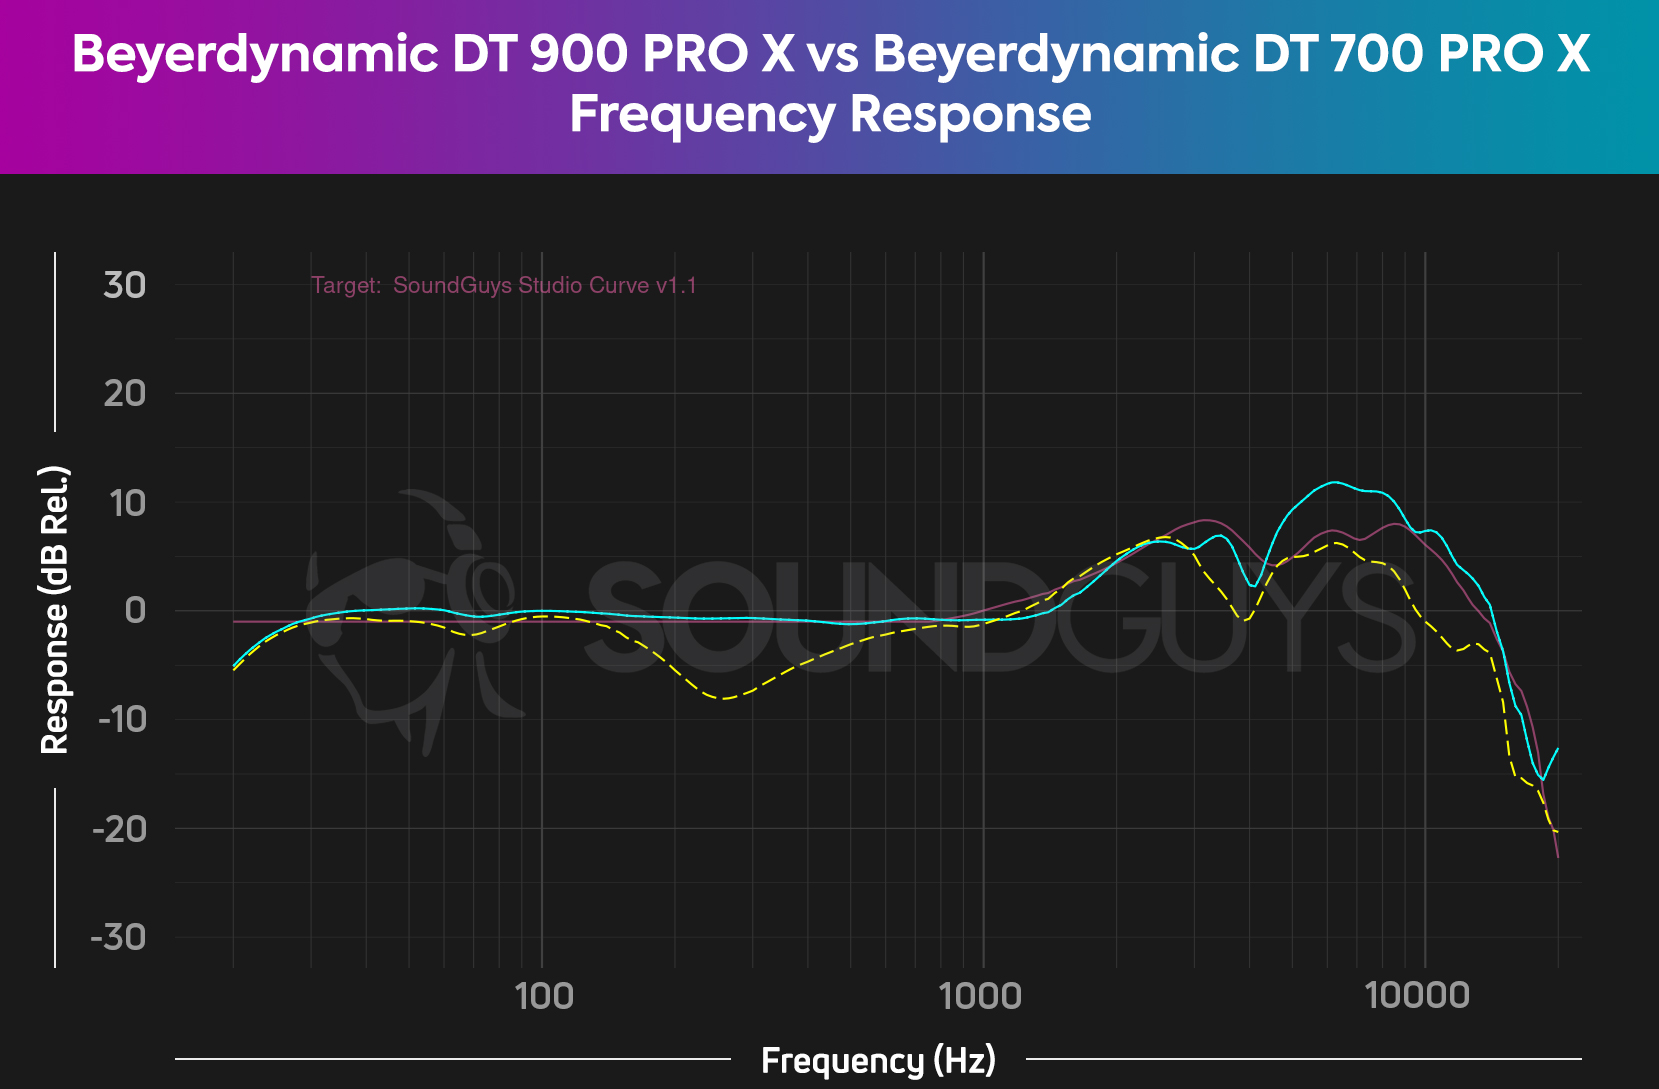 A chart compares the Beyerdynamic DT 900 PRO X to the Beyerdynamic DT 700 PRO X frequency responses against our Studio Curve V2, and displays minor midrange and treble response differences between the headsets.